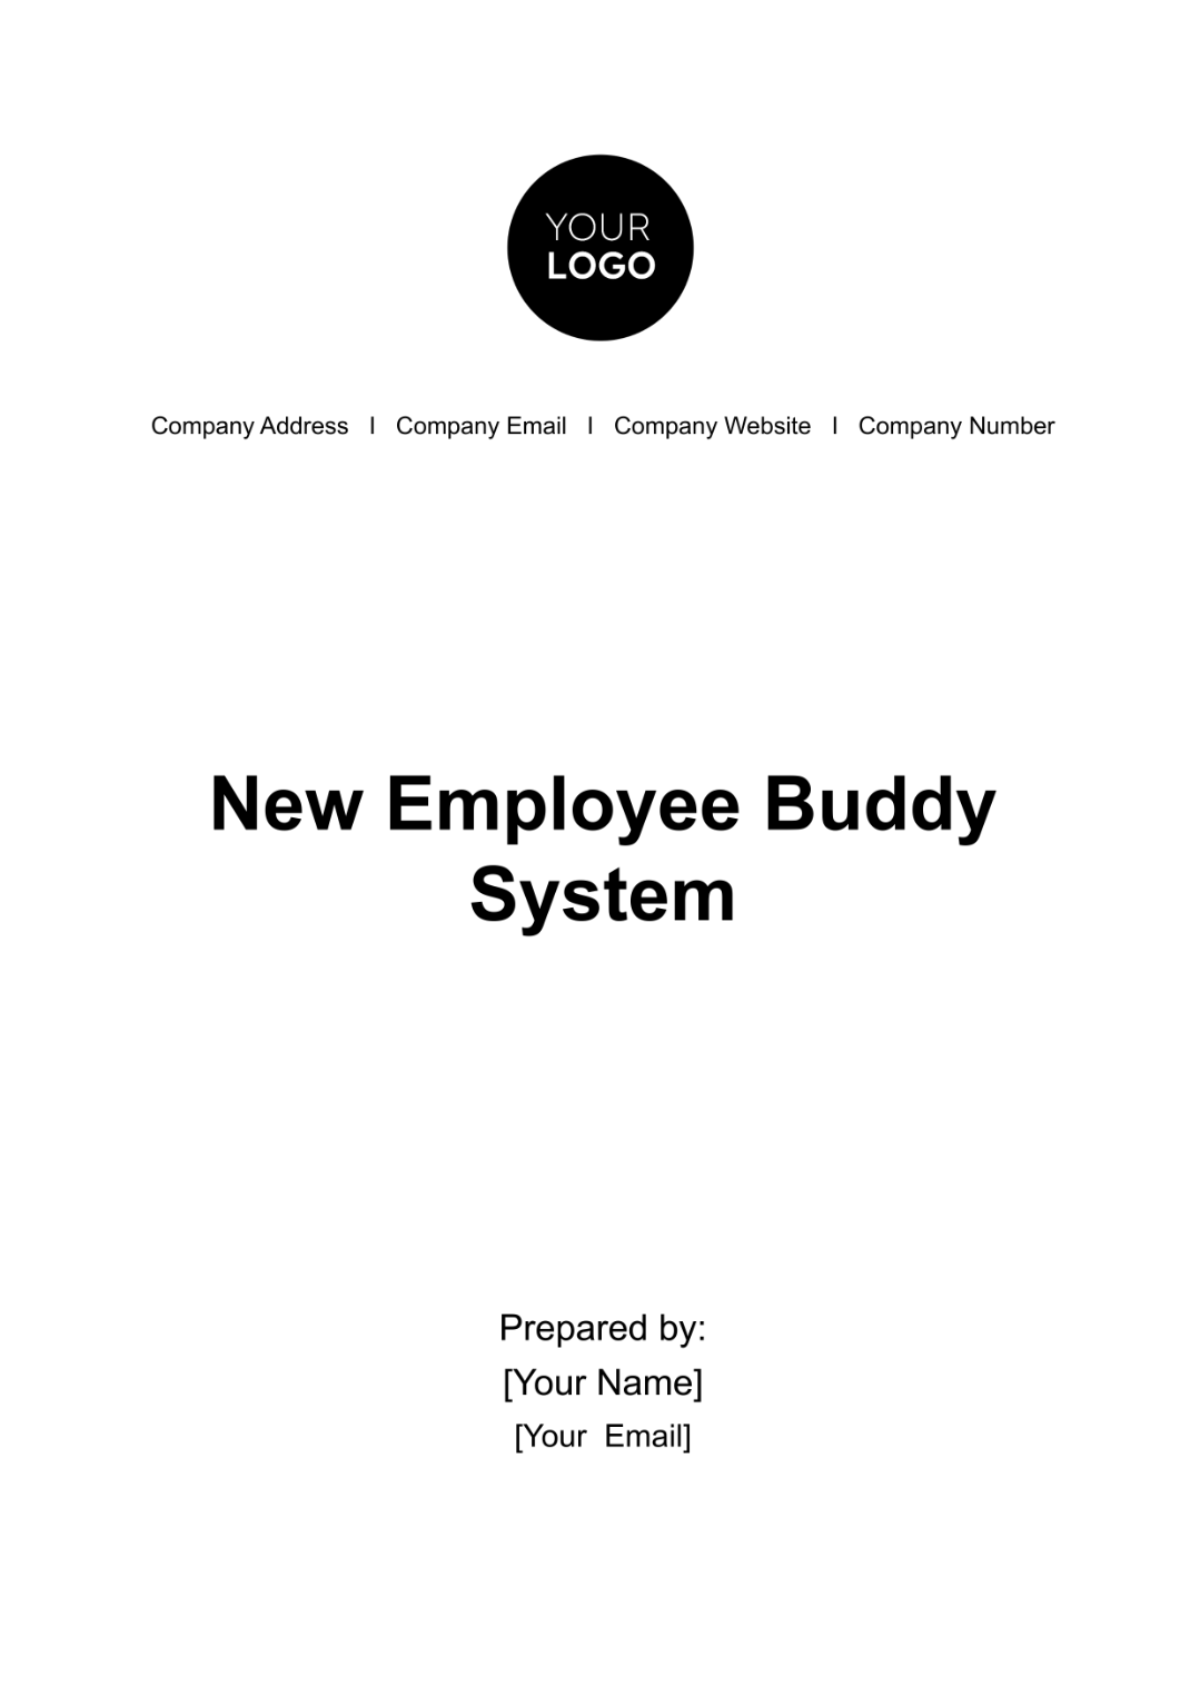 Free New Employee Buddy System Guide HR Template